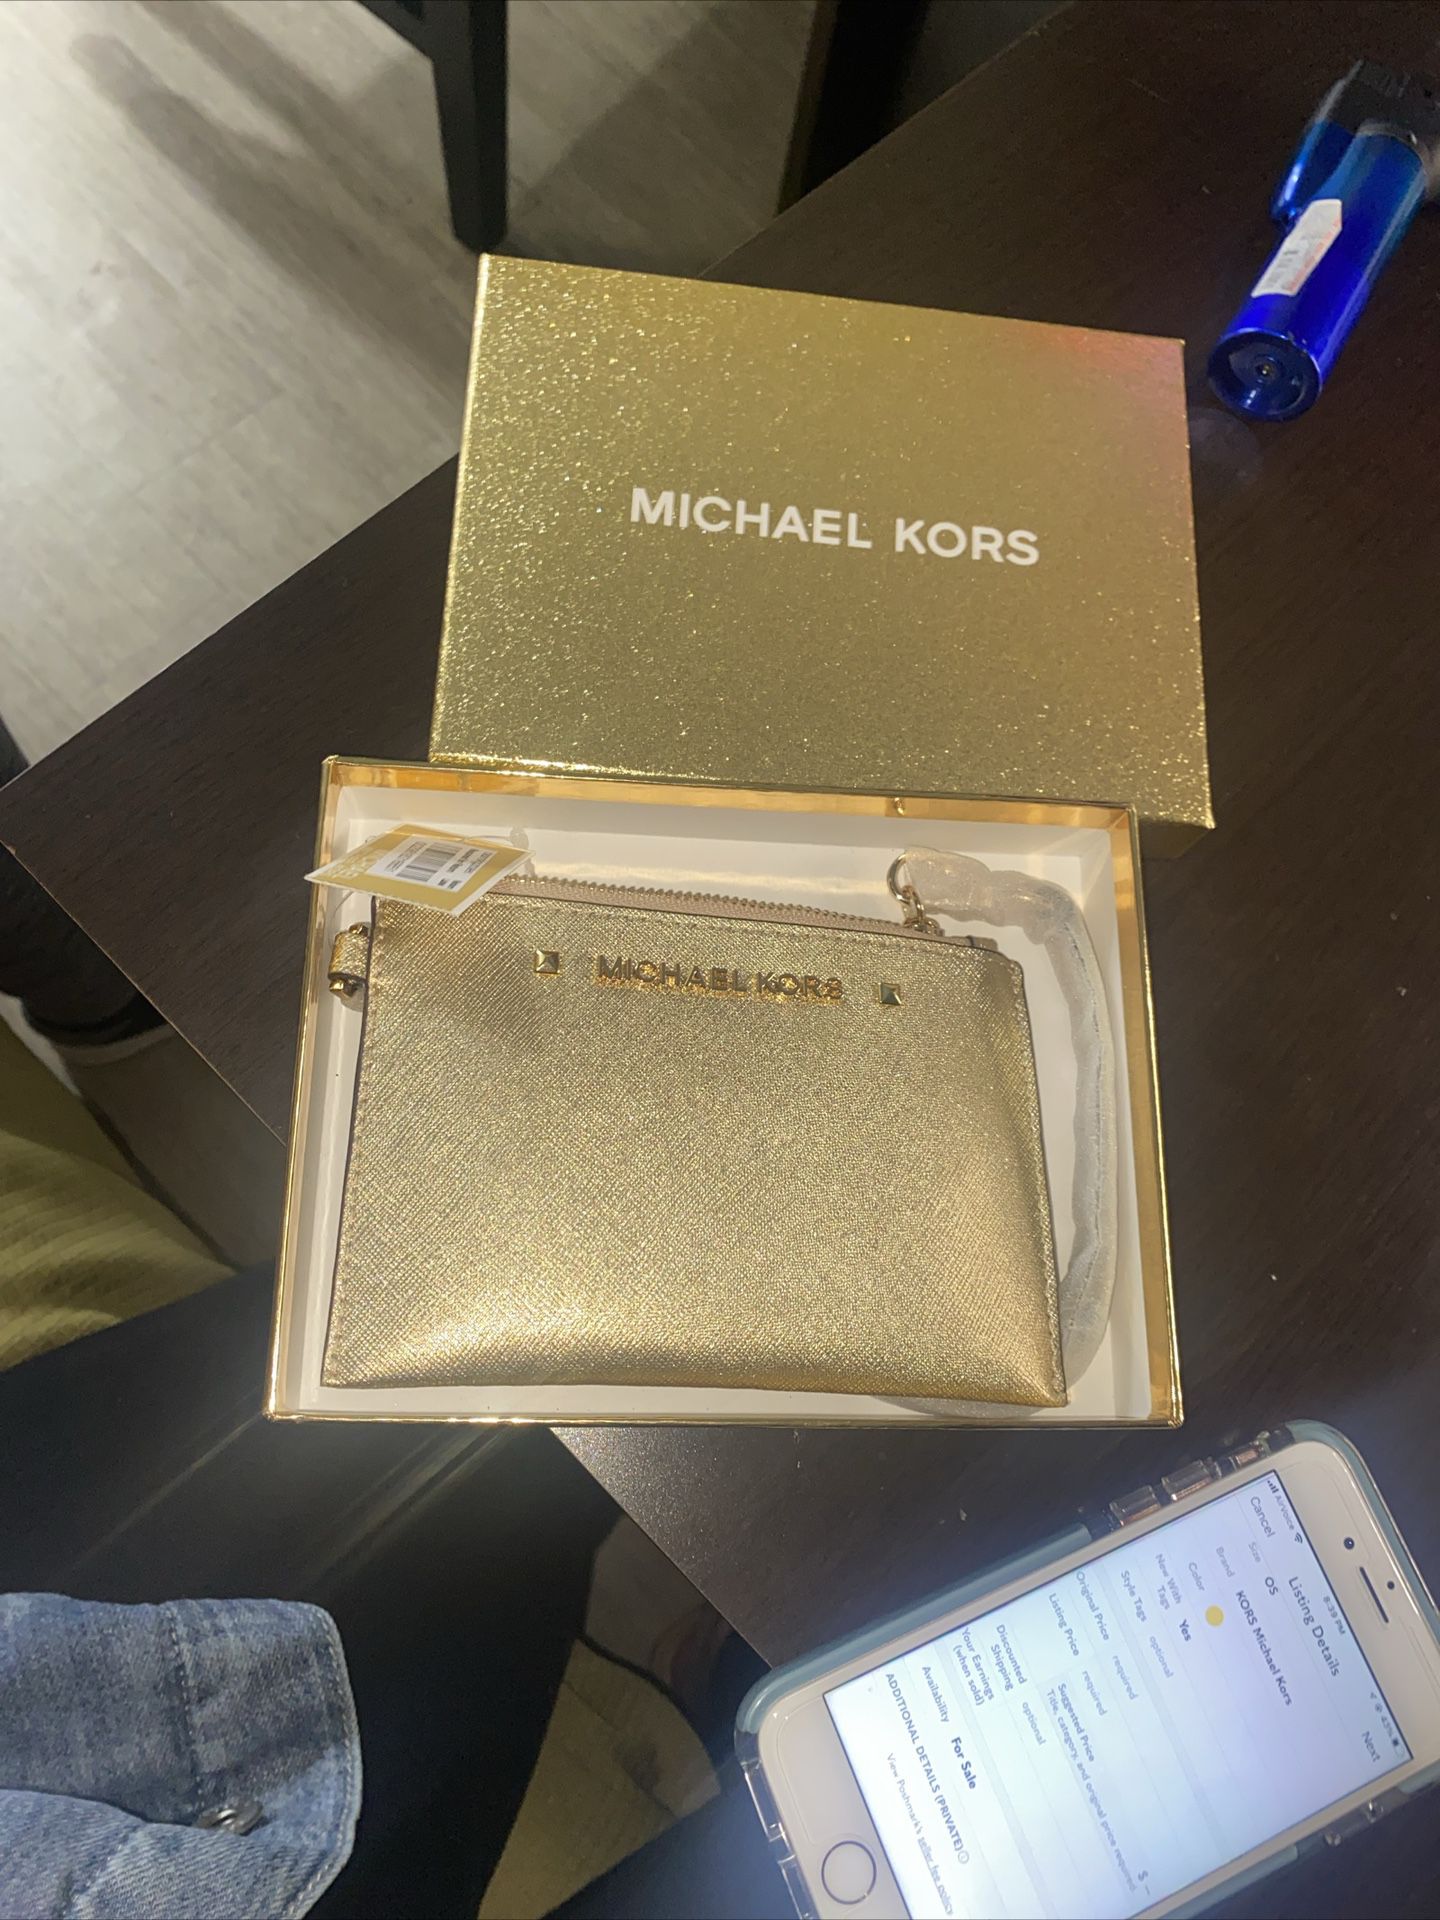 Michael Kors Wristlet Wallet in Gift Box. Condition is New with tags.